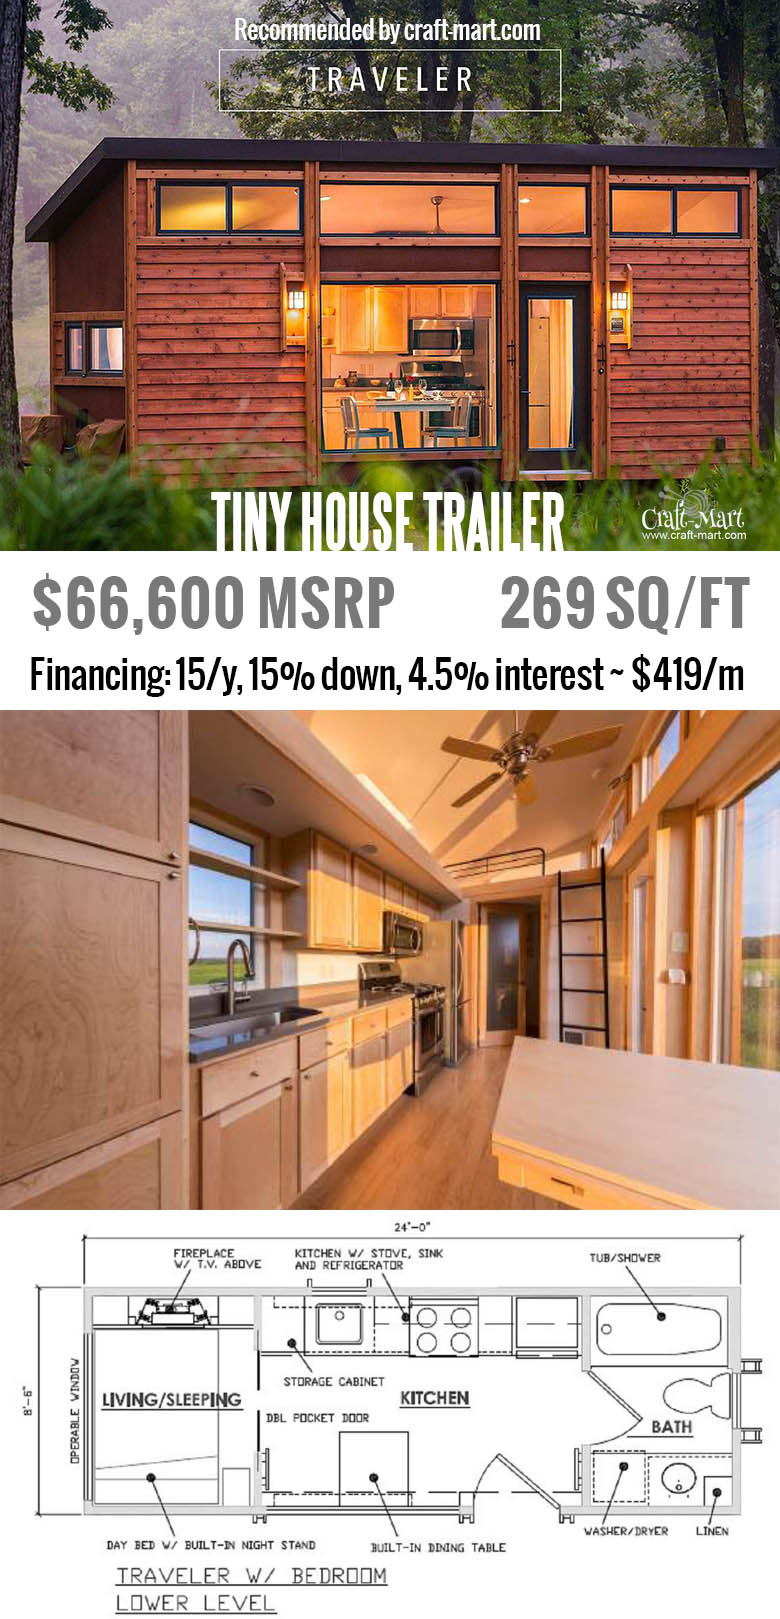 Traveler model has huge windows & modern interior. Do you have a place to put one of these tiny houses? Get one of these for FREE and start earning money from renting it! Or simply buy one of the most beautiful tiny house trailers with easy financing starting from $195/m! #tinyhouse #tinyhouseplans #minimalism